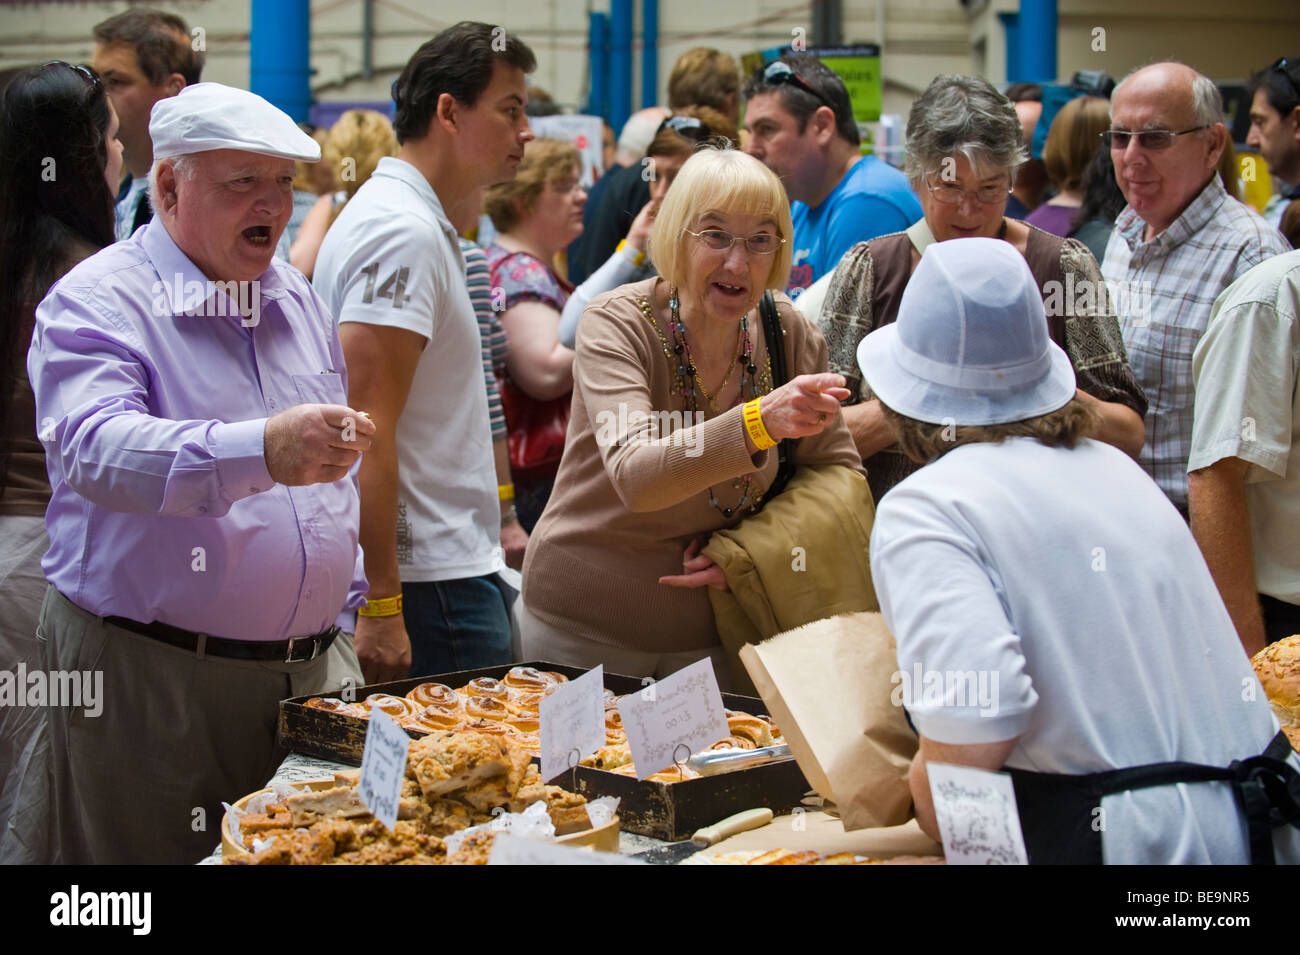 Customers queue to buy bread and cakes on bakers stall in Market Hall at Abergavenny Food Festival Monmouthshire South Wales UK Stock Photo